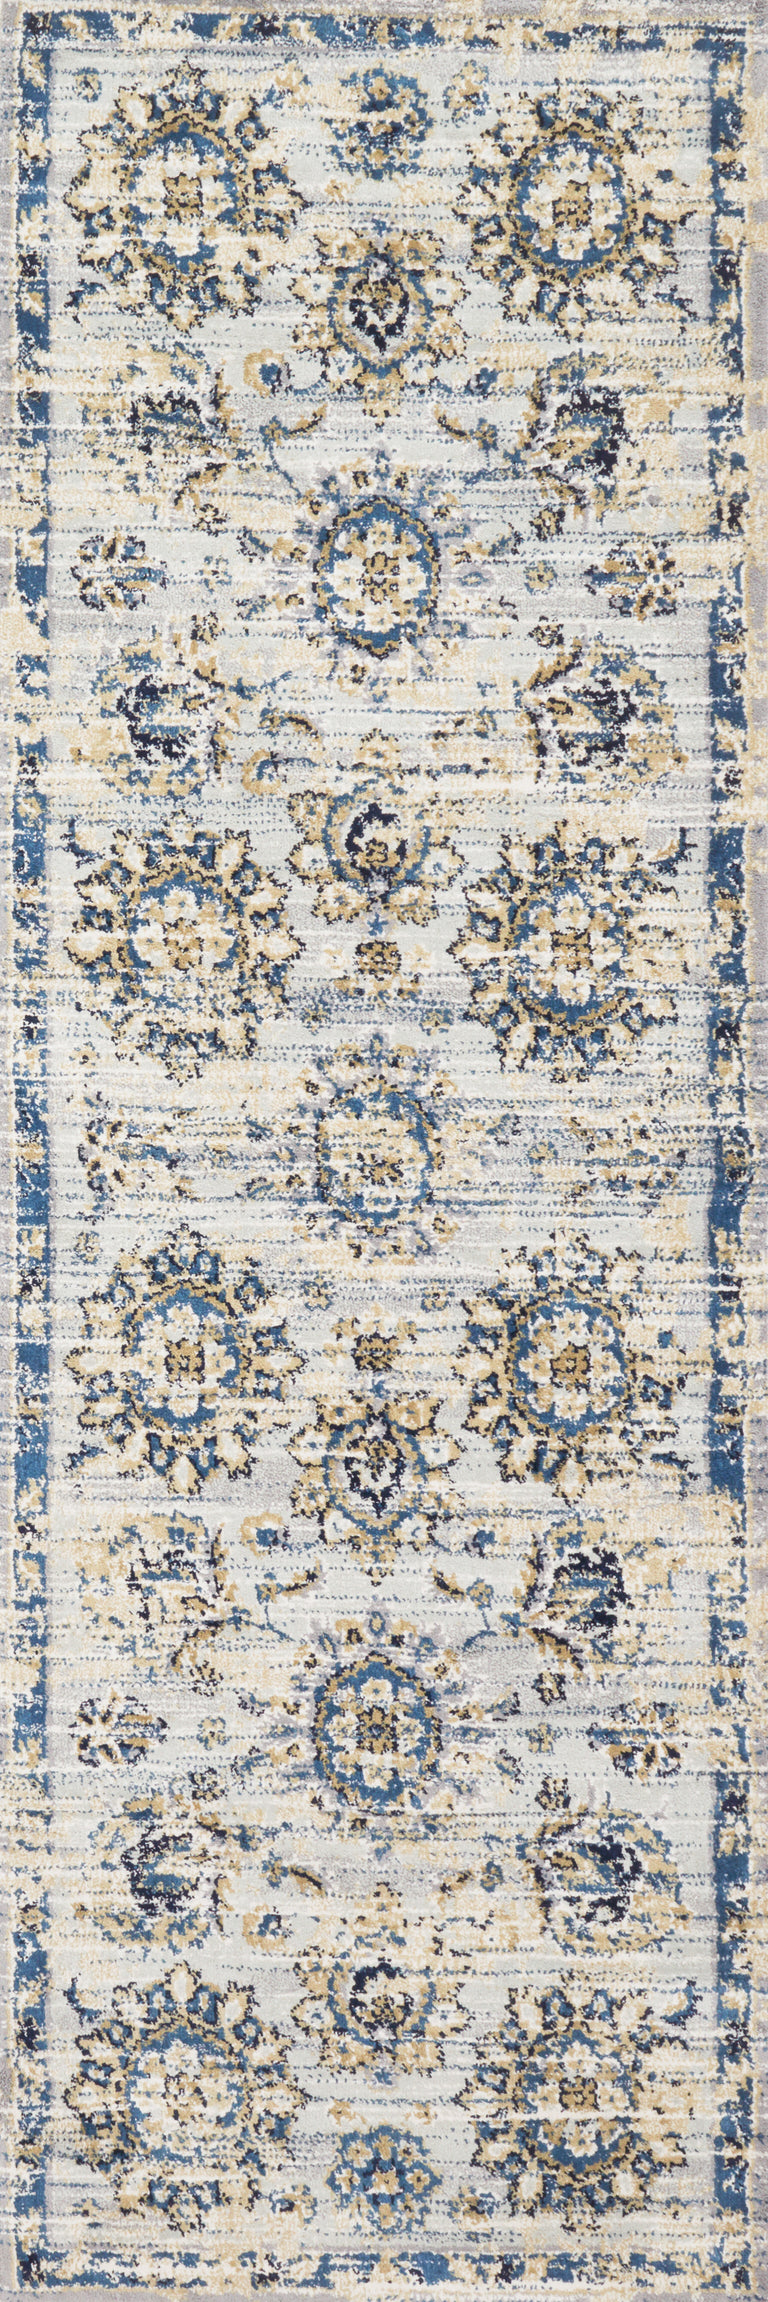 Loloi Rugs Torrance Collection Rug in Grey, Navy - 9'3" x 13'